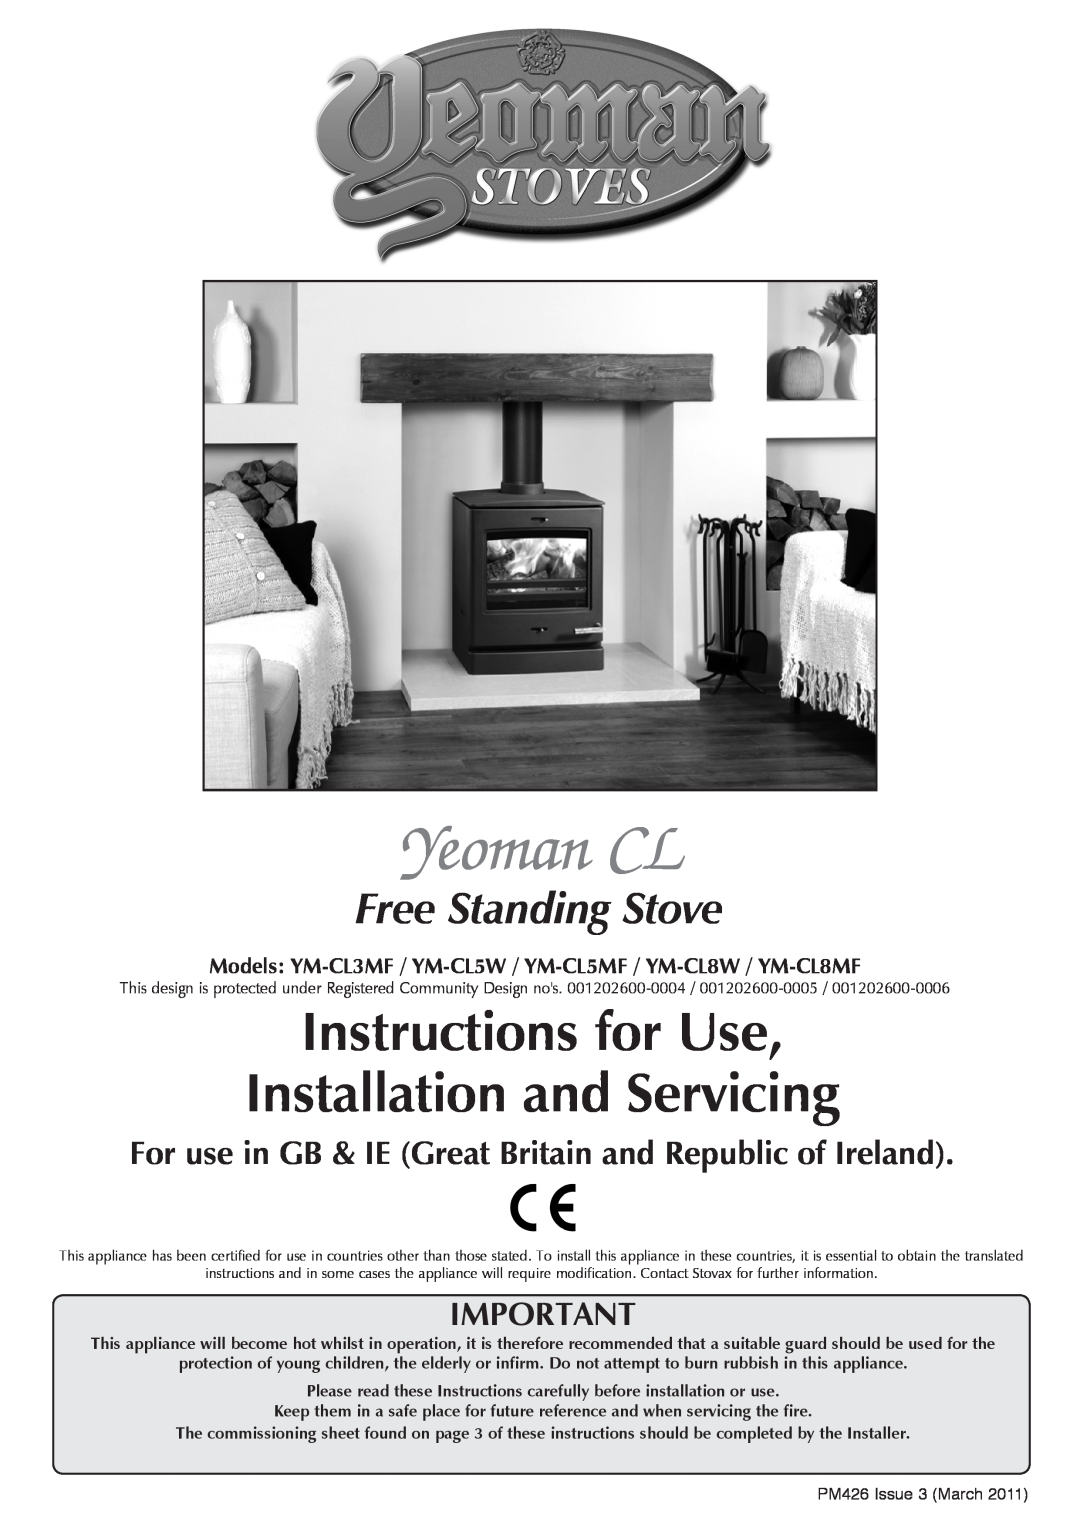 Yeoman YM-CL5W, YM-CL8W, YM-CL8MF manual Yeoman CL, Instructions for Use Installation and Servicing, Free Standing Stove 